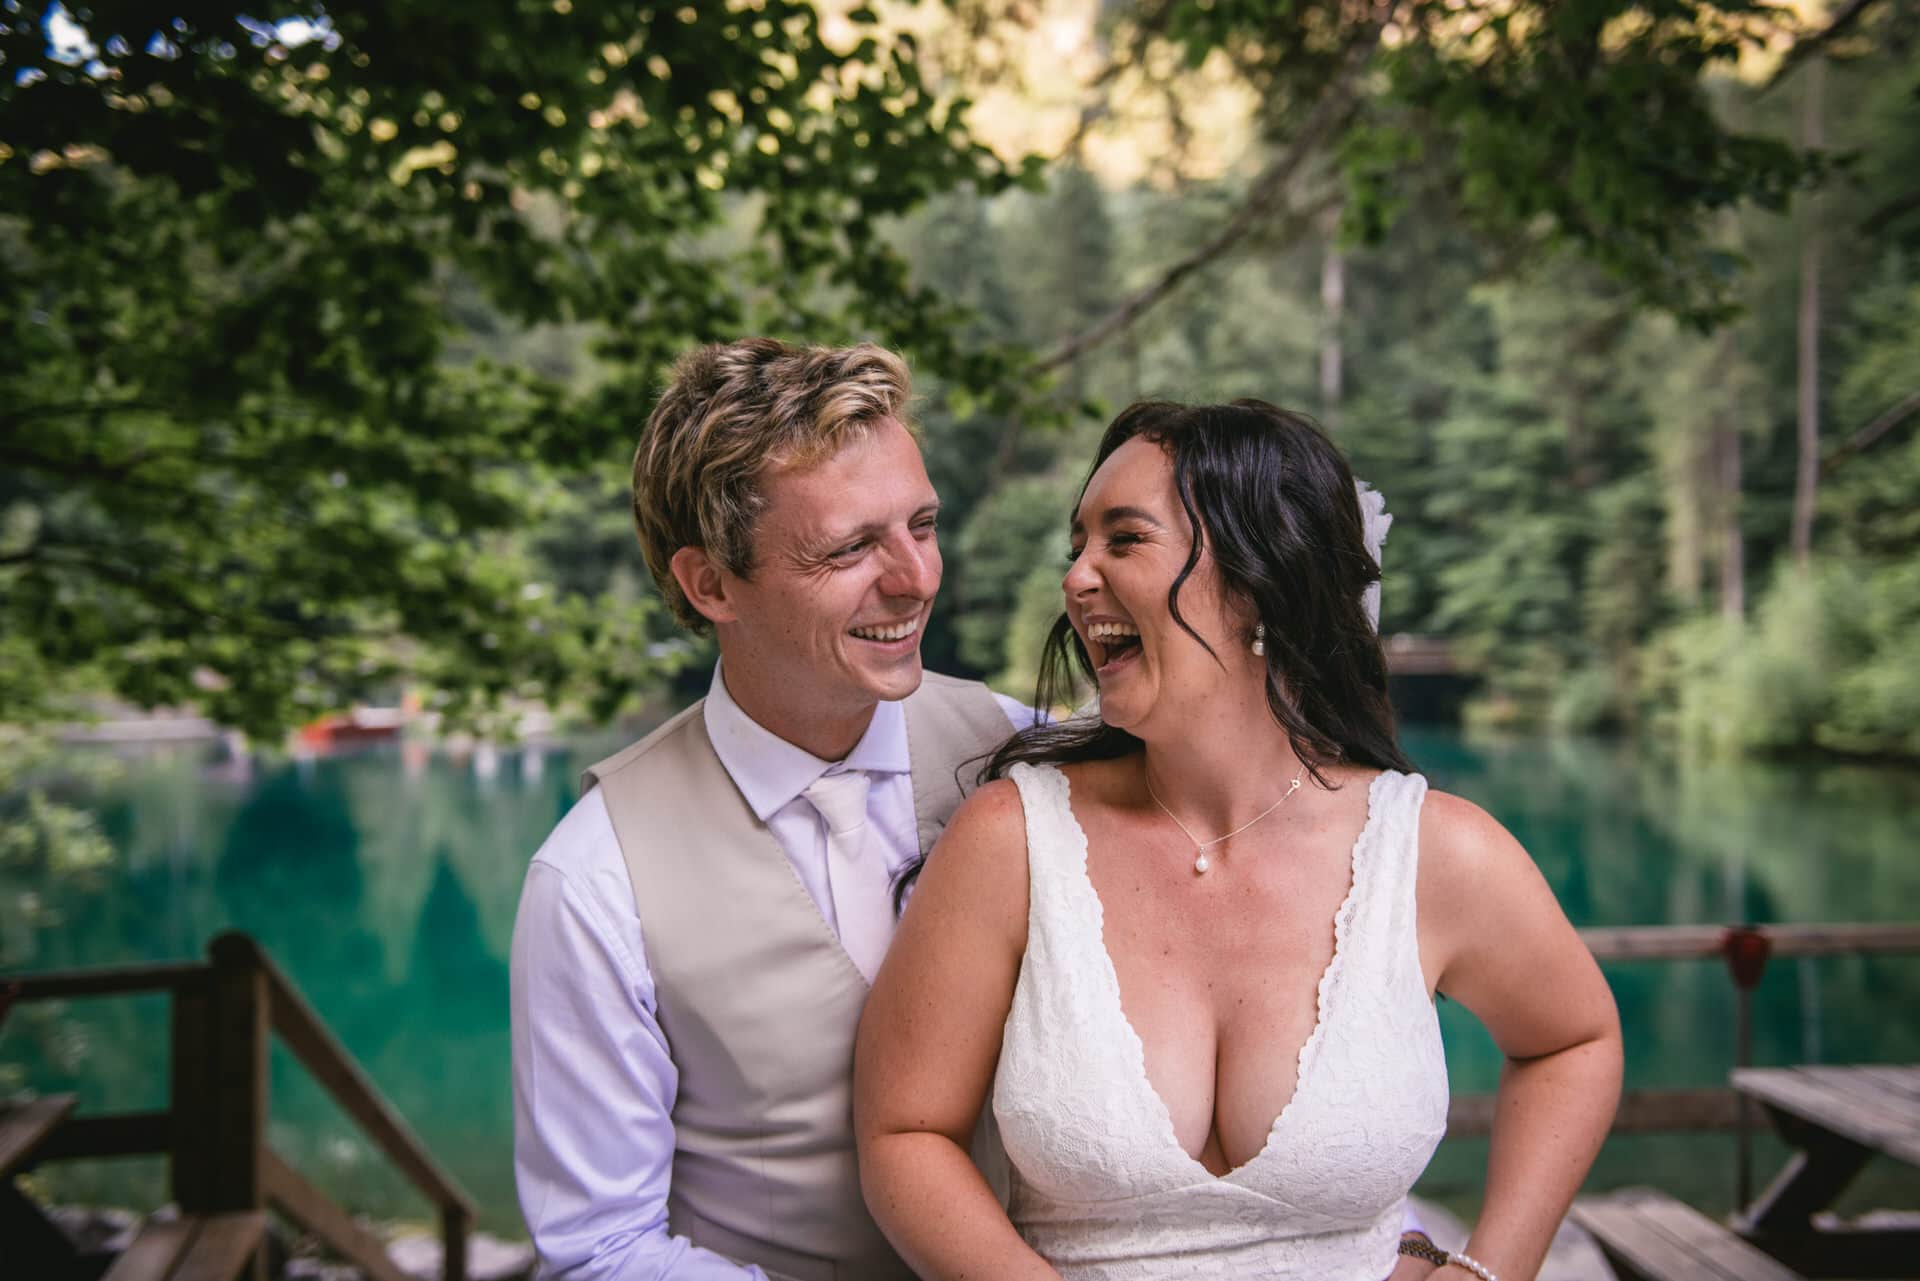 Vows exchanged amidst majestic beauty - Emily & Luke's hiking elopement.